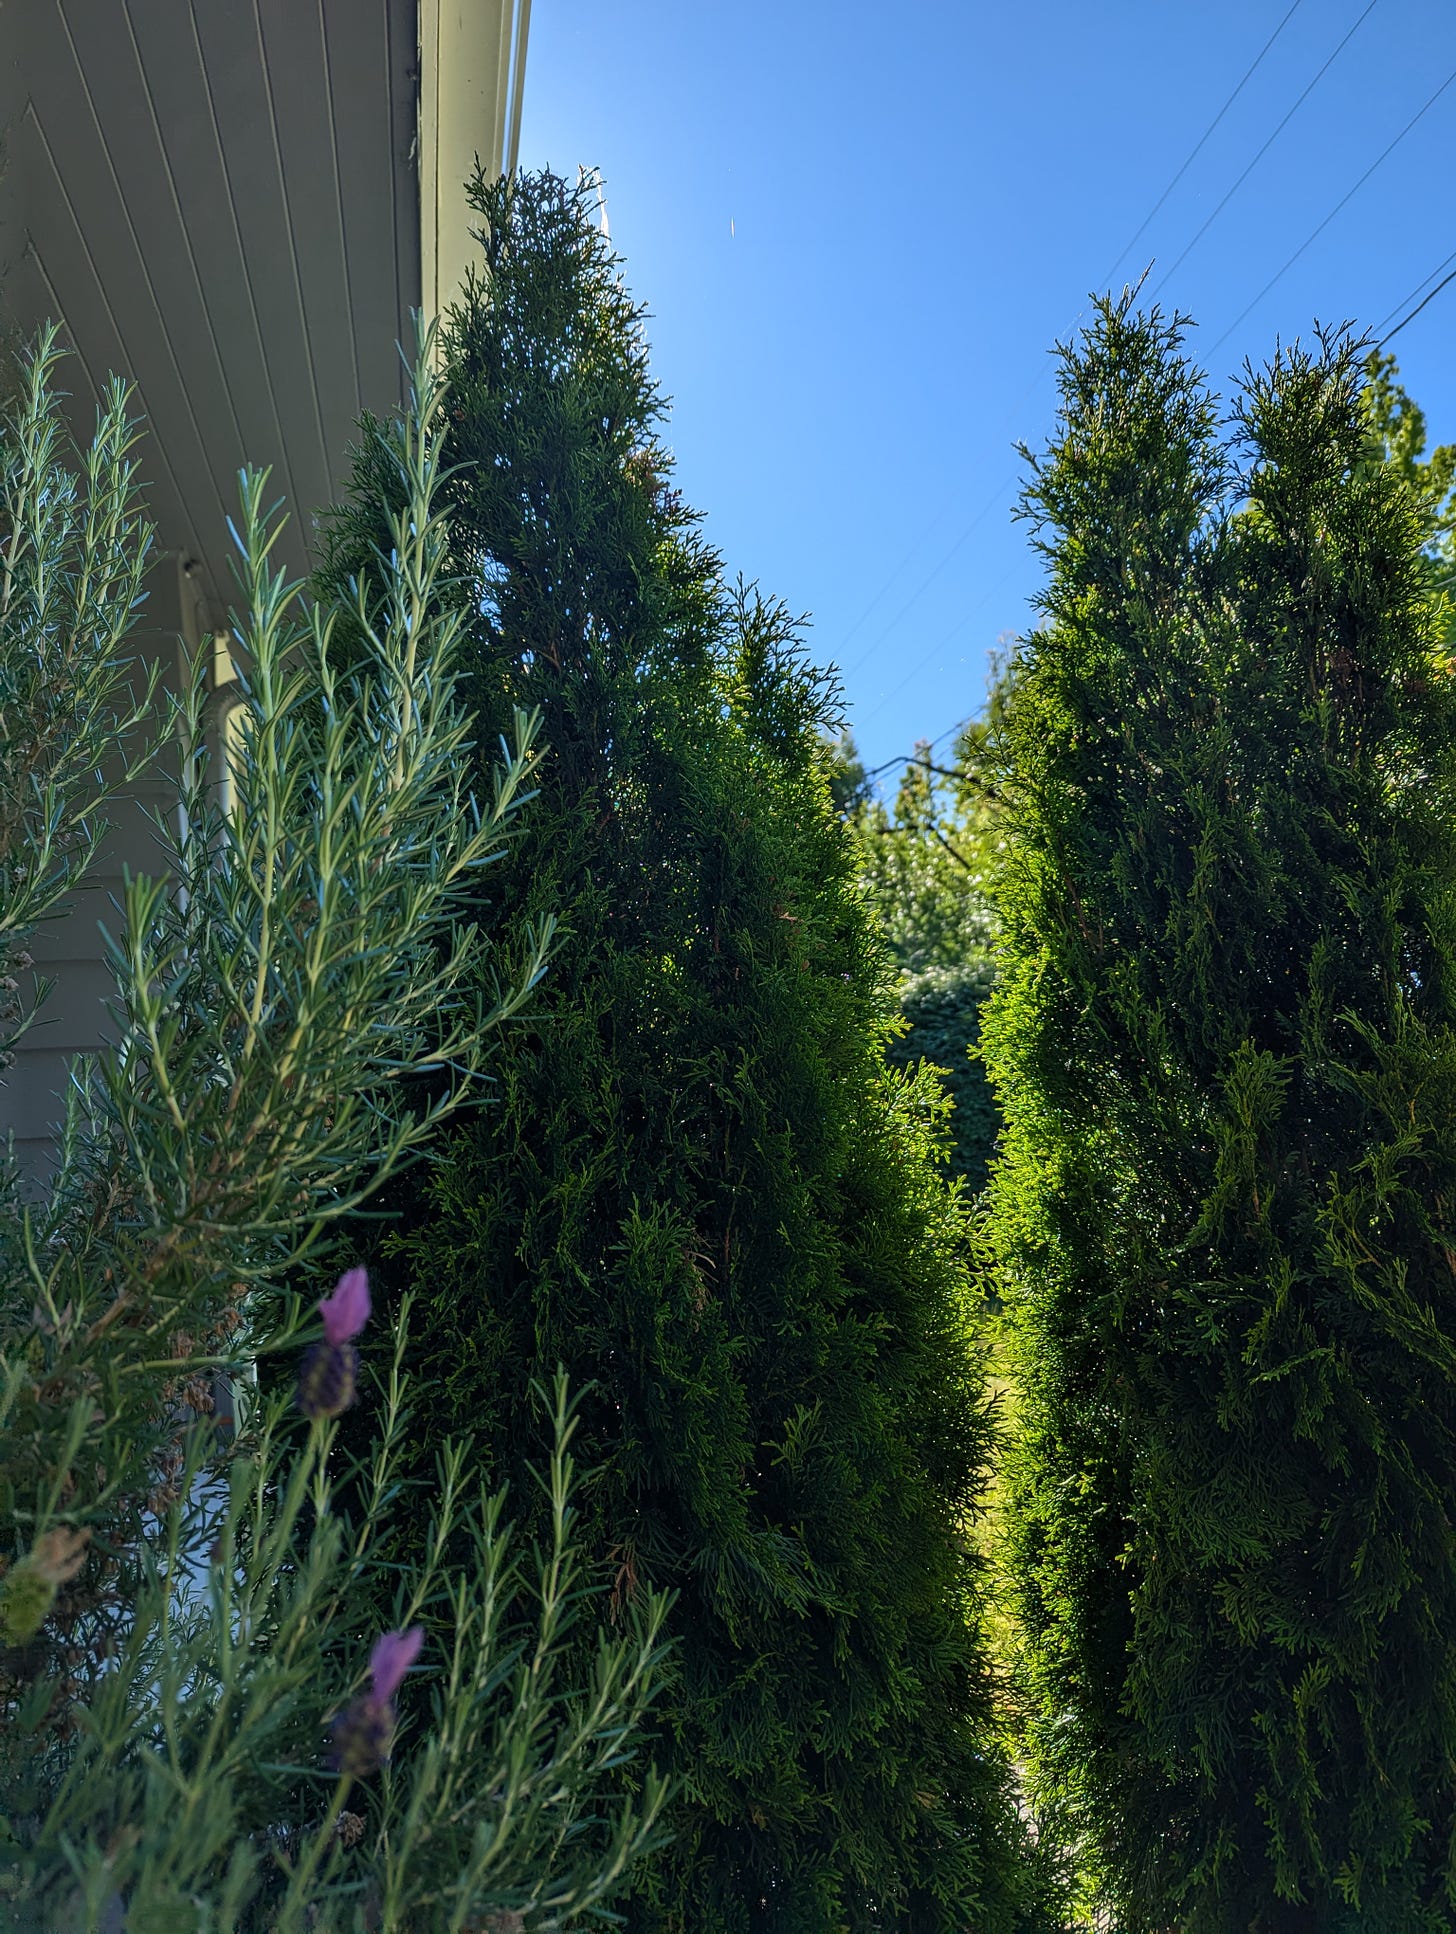 a view of the sky through two arborvitae tops with a side of rosemary.  The viewer is in shade